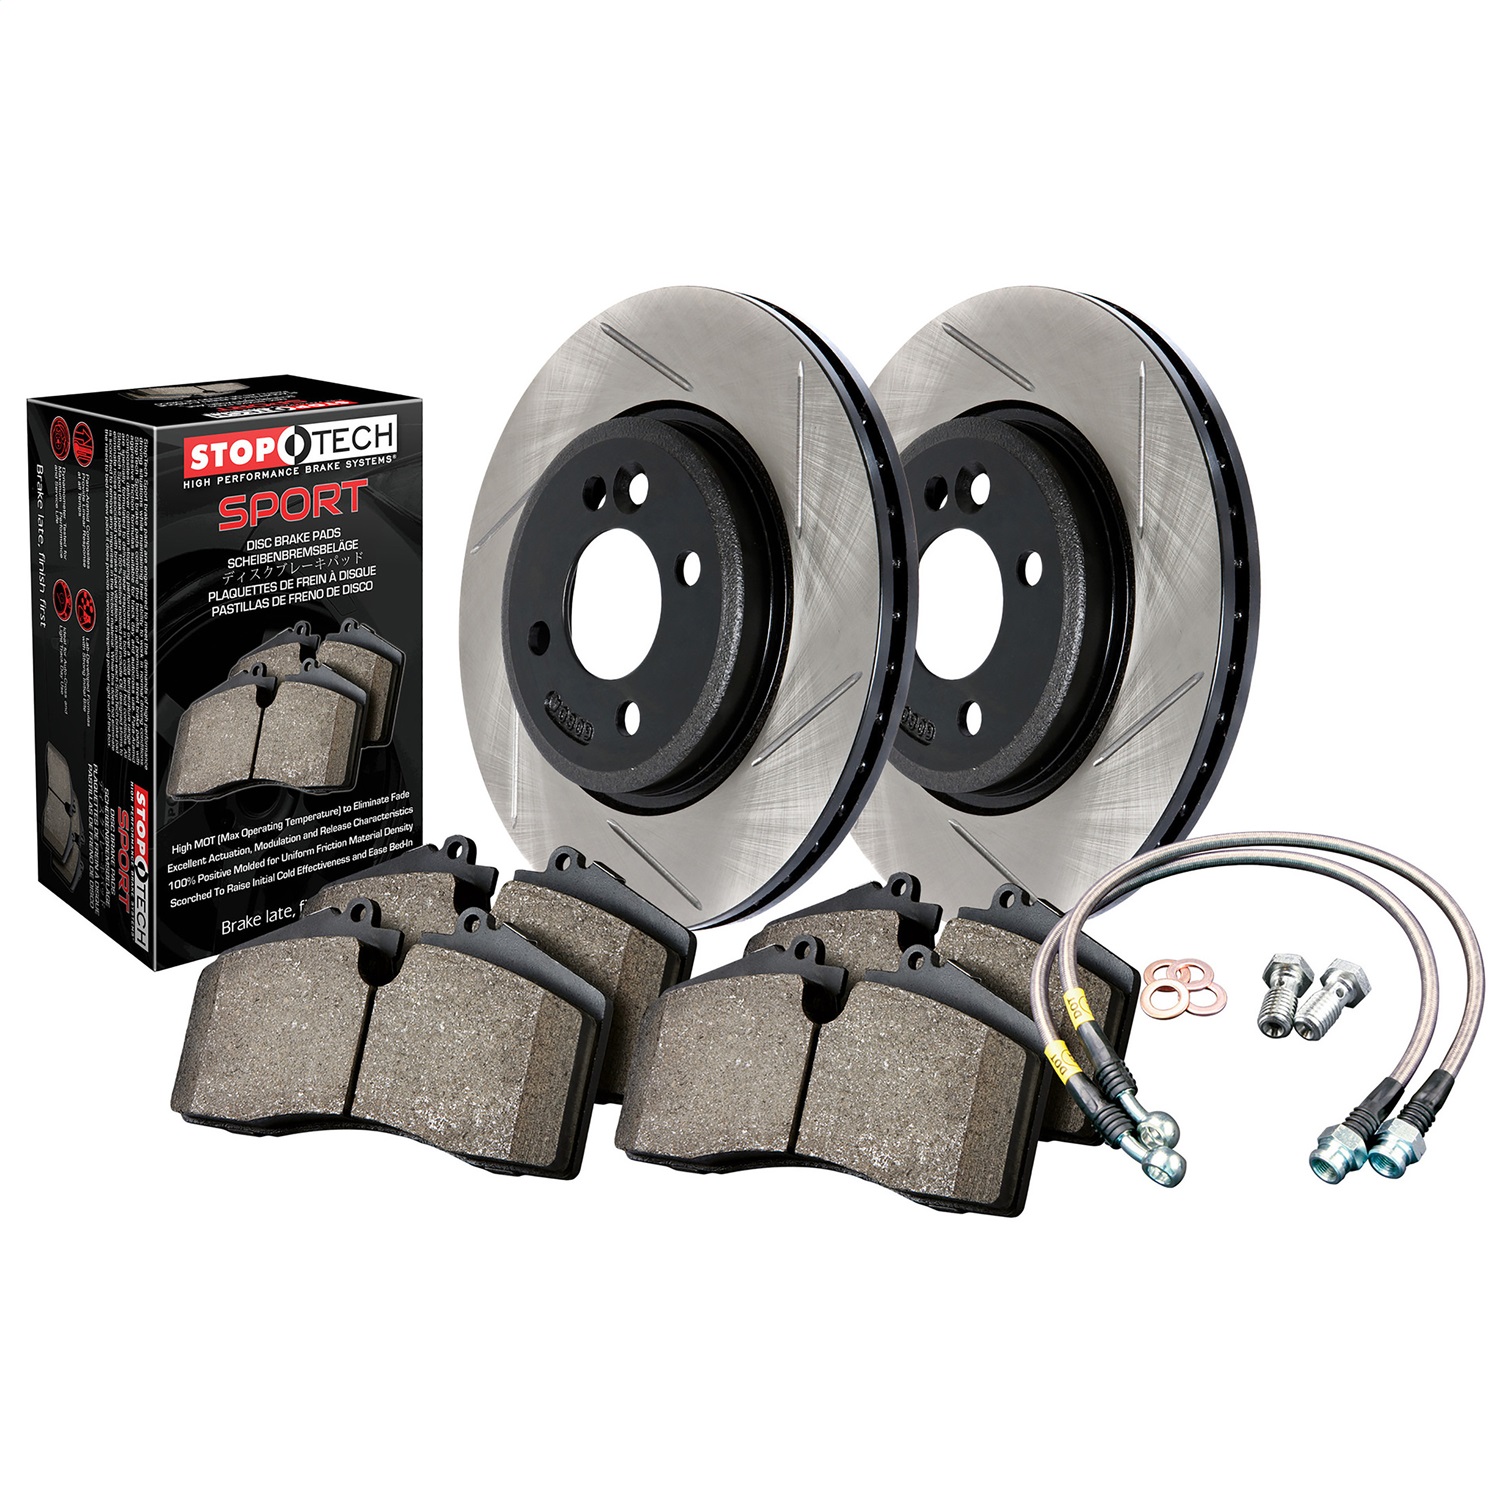 StopTech 977.44000F Sport Disc Brake Kit w/Slotted Rotors